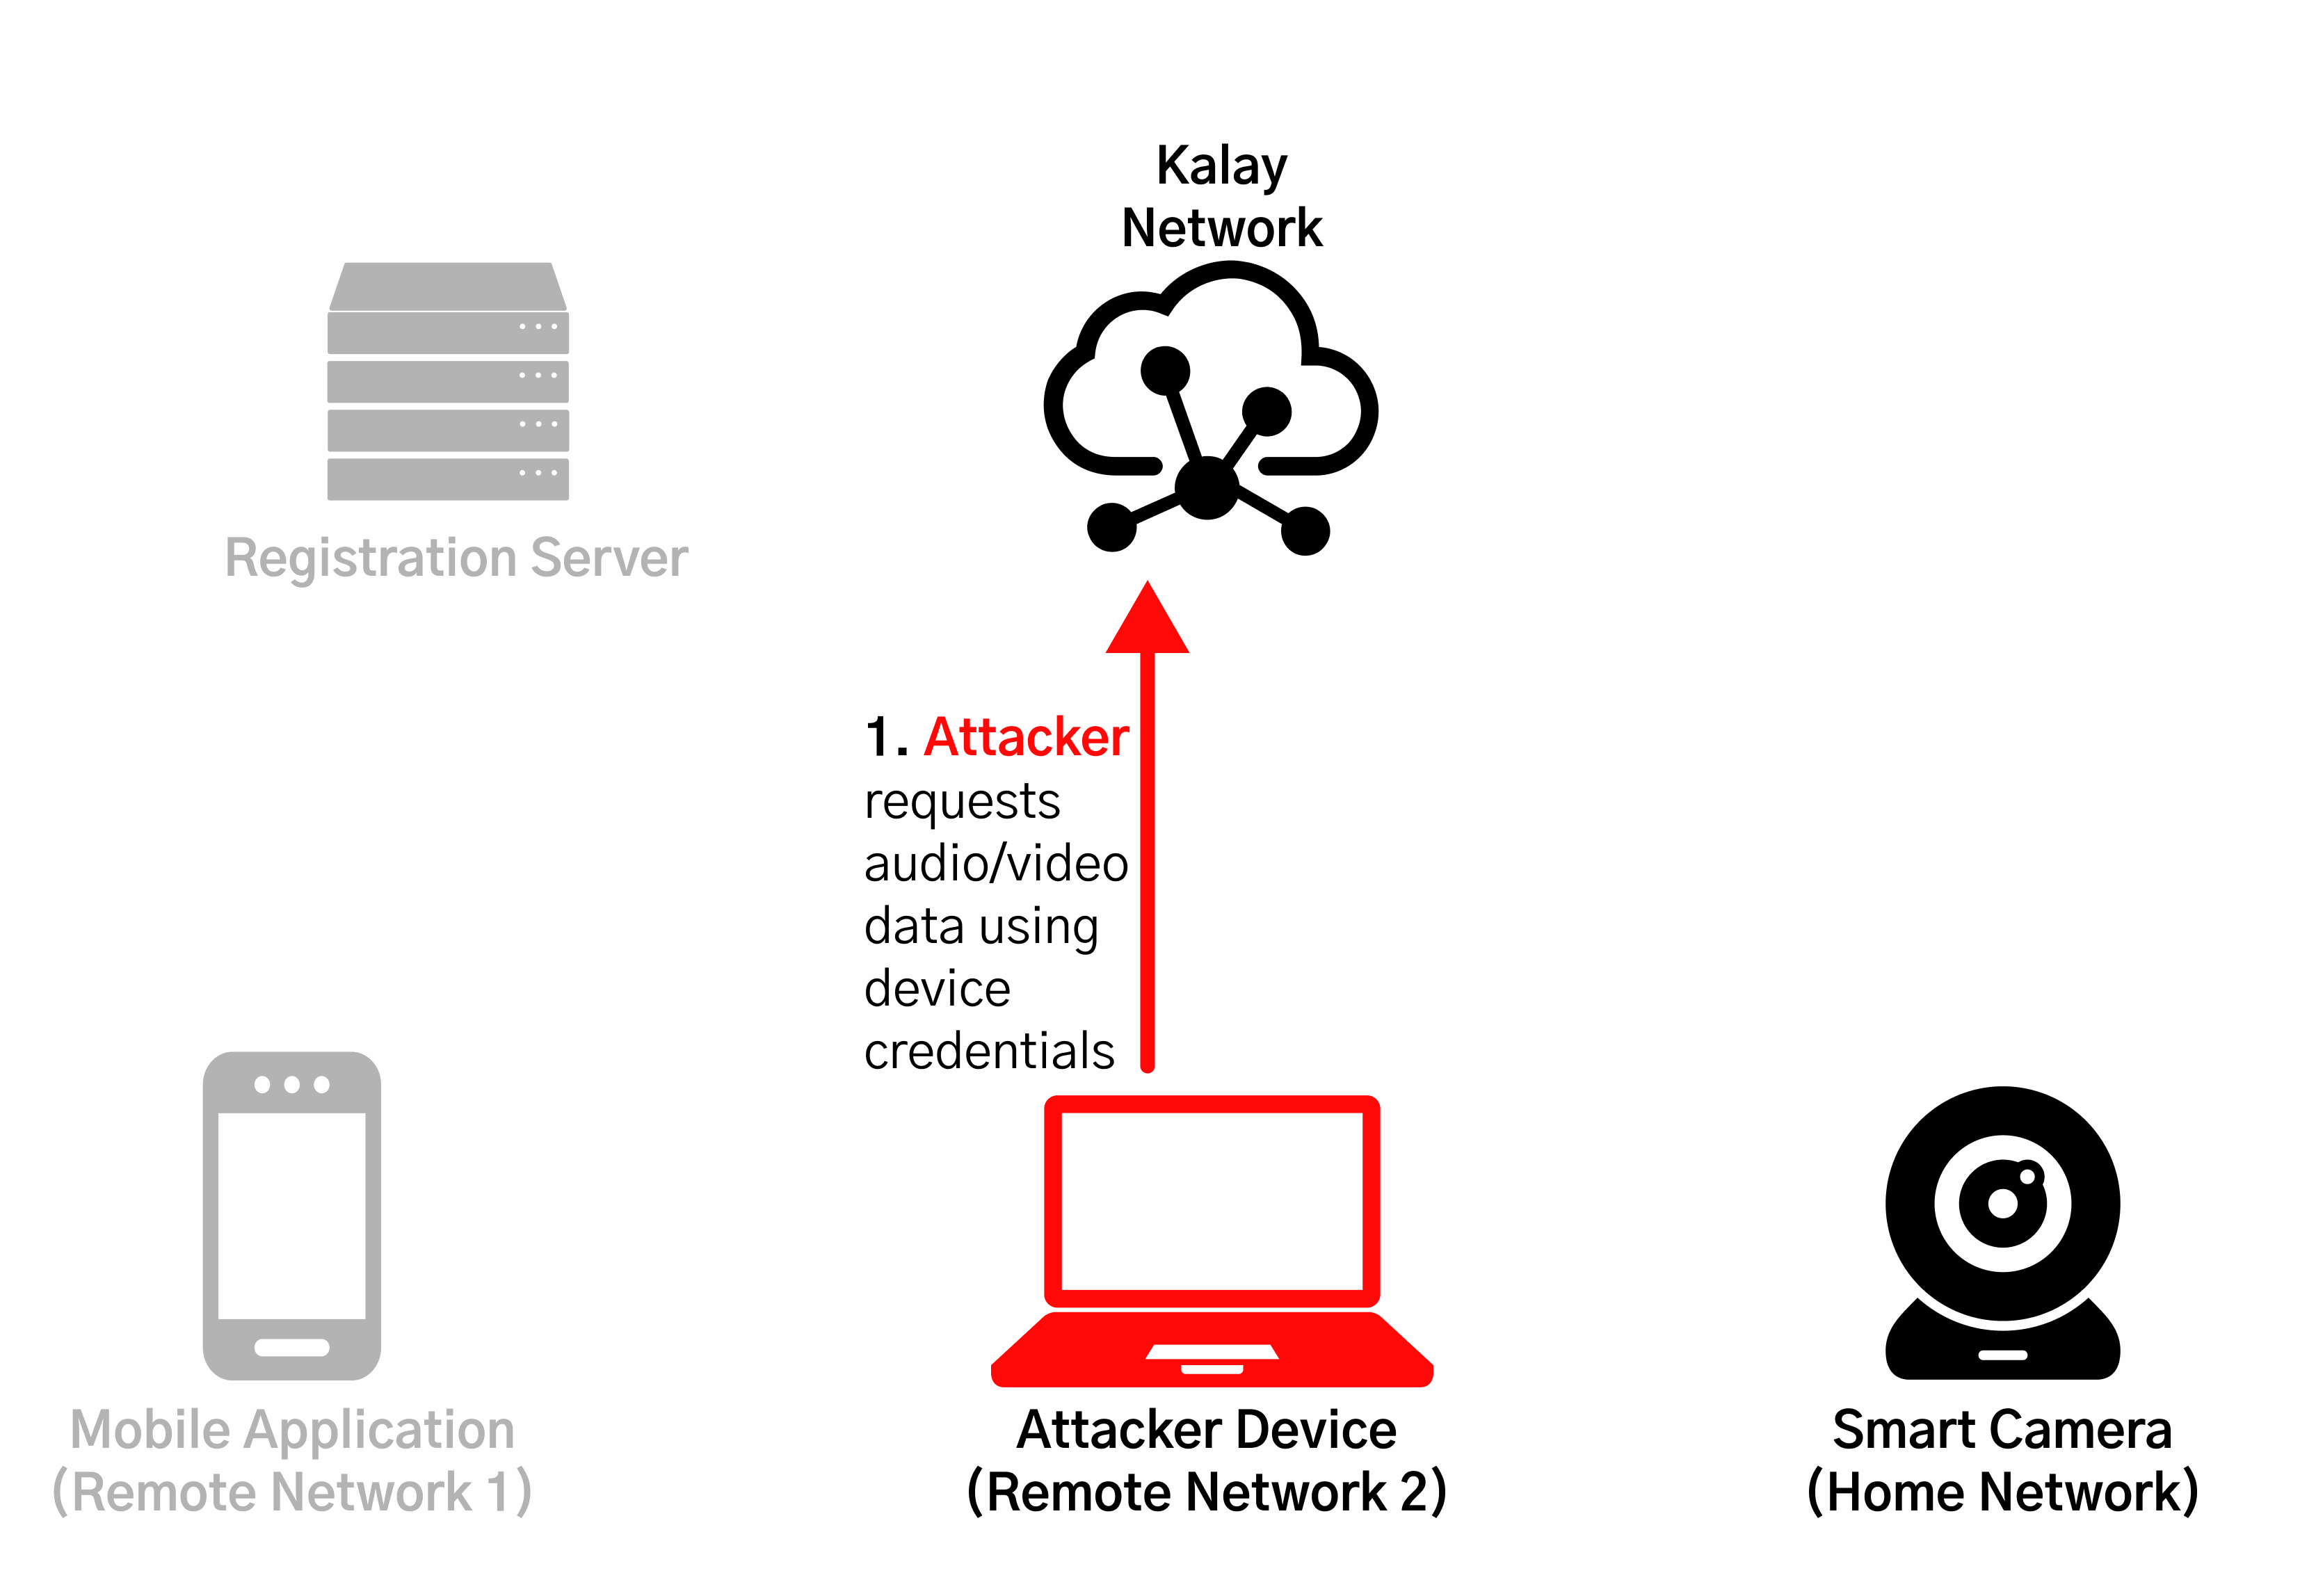 Attacker using captured credentials to fetch audio/video data